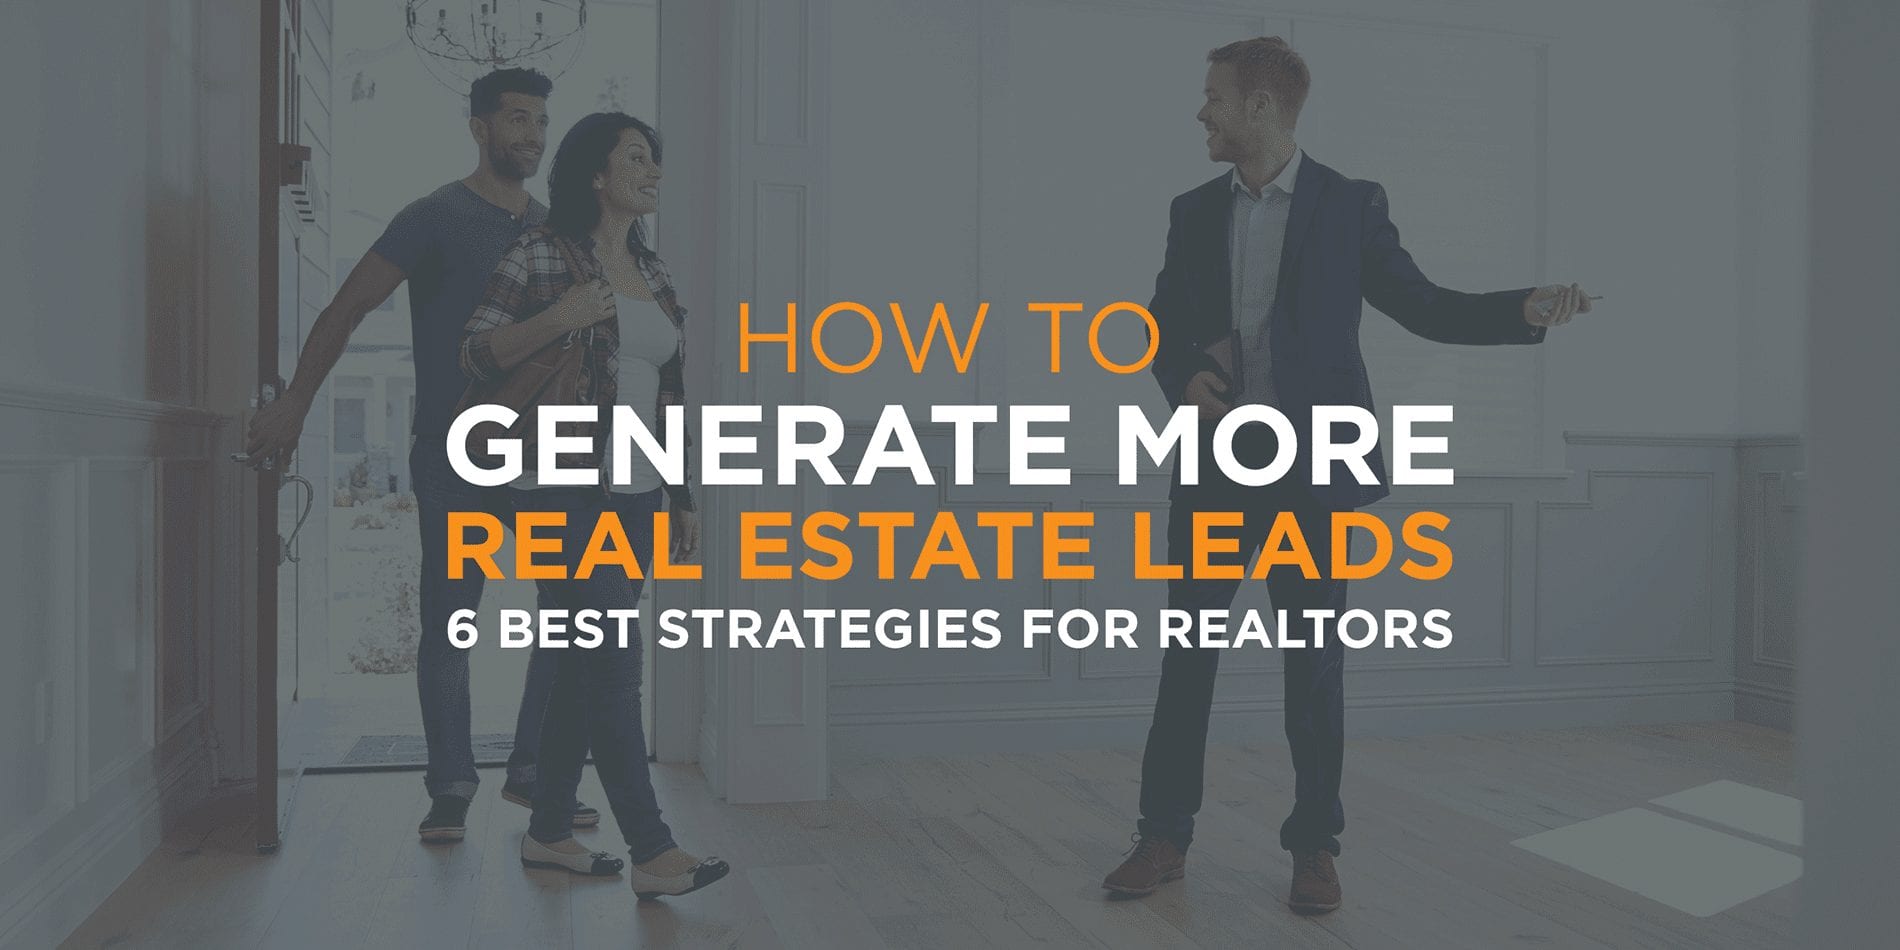 The 7 Best Real Estate Lead Generation Companies of 2021